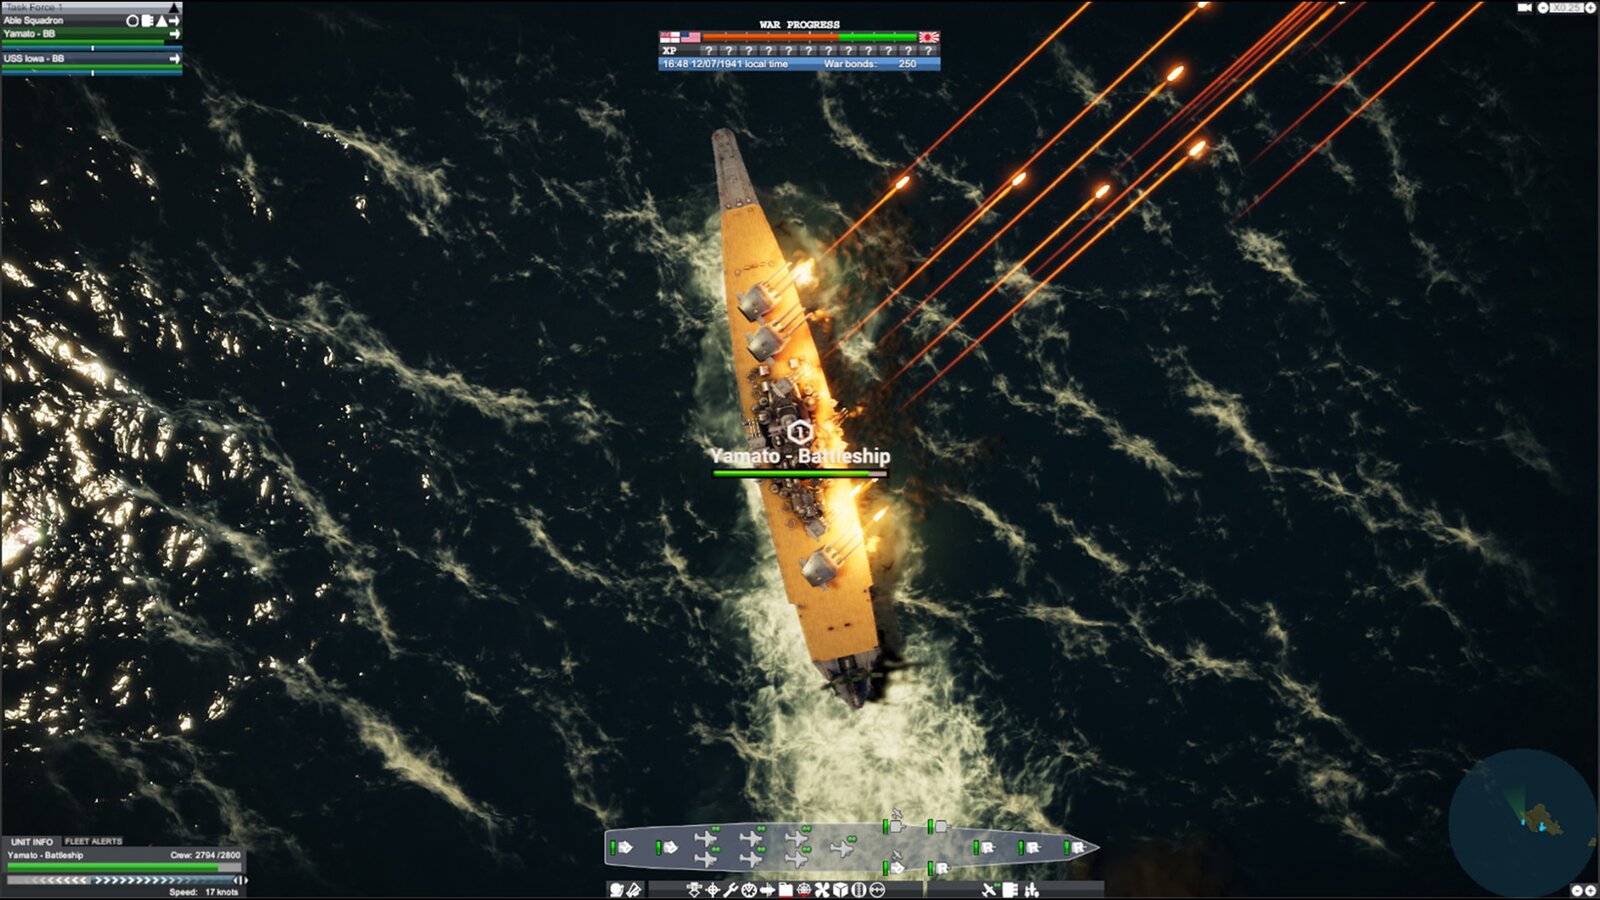 Victory At Sea: Pacific